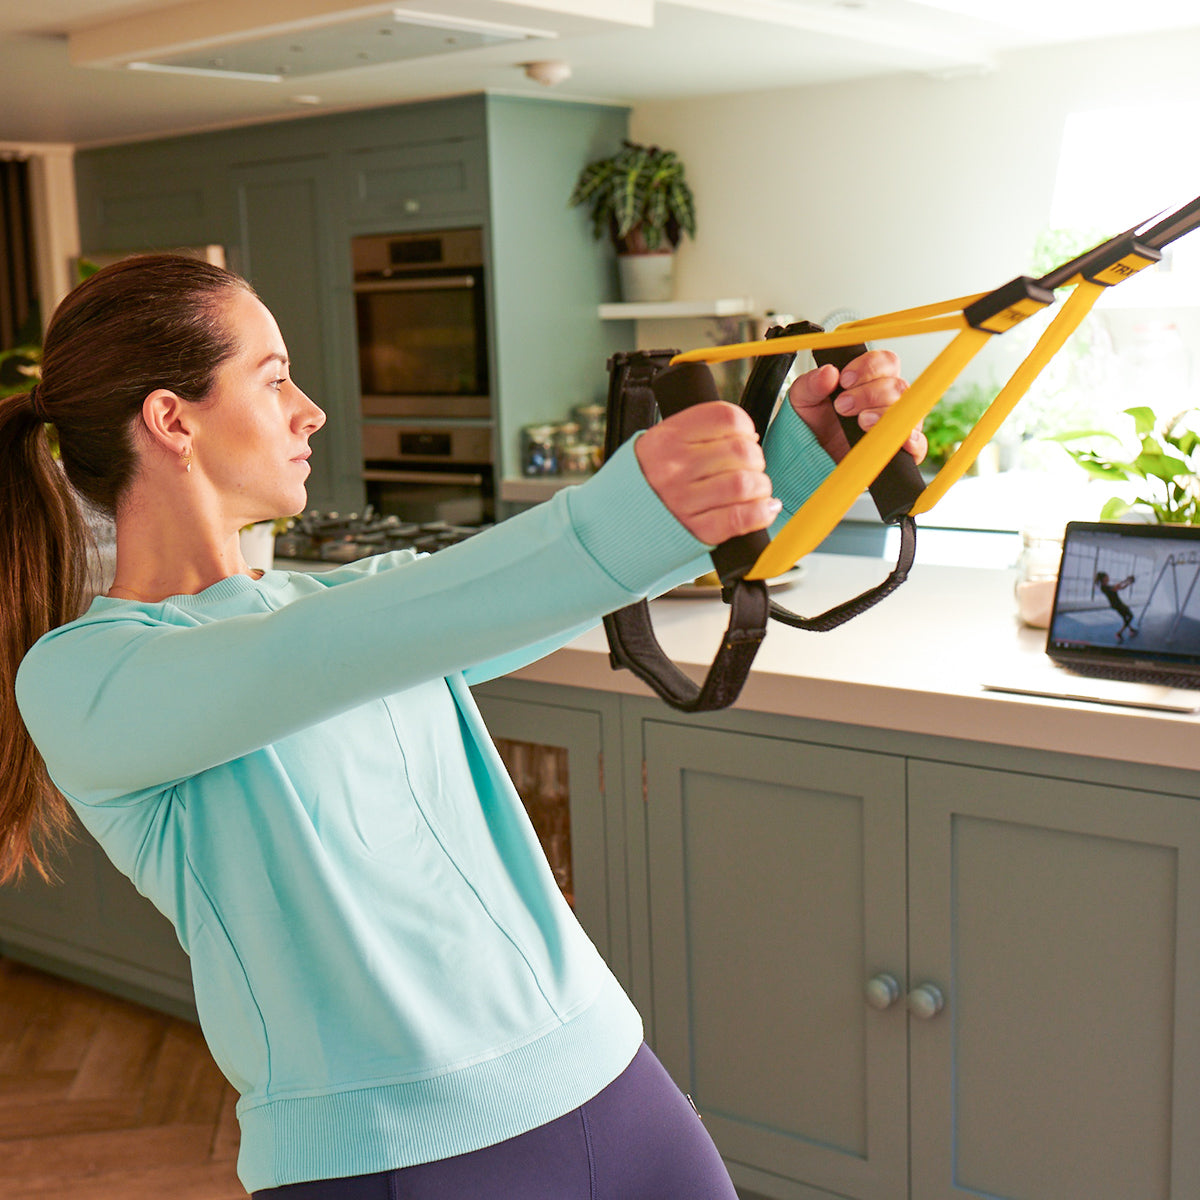 TRX 101: The Beginner's Guide to Getting Your Straps On - Anytime